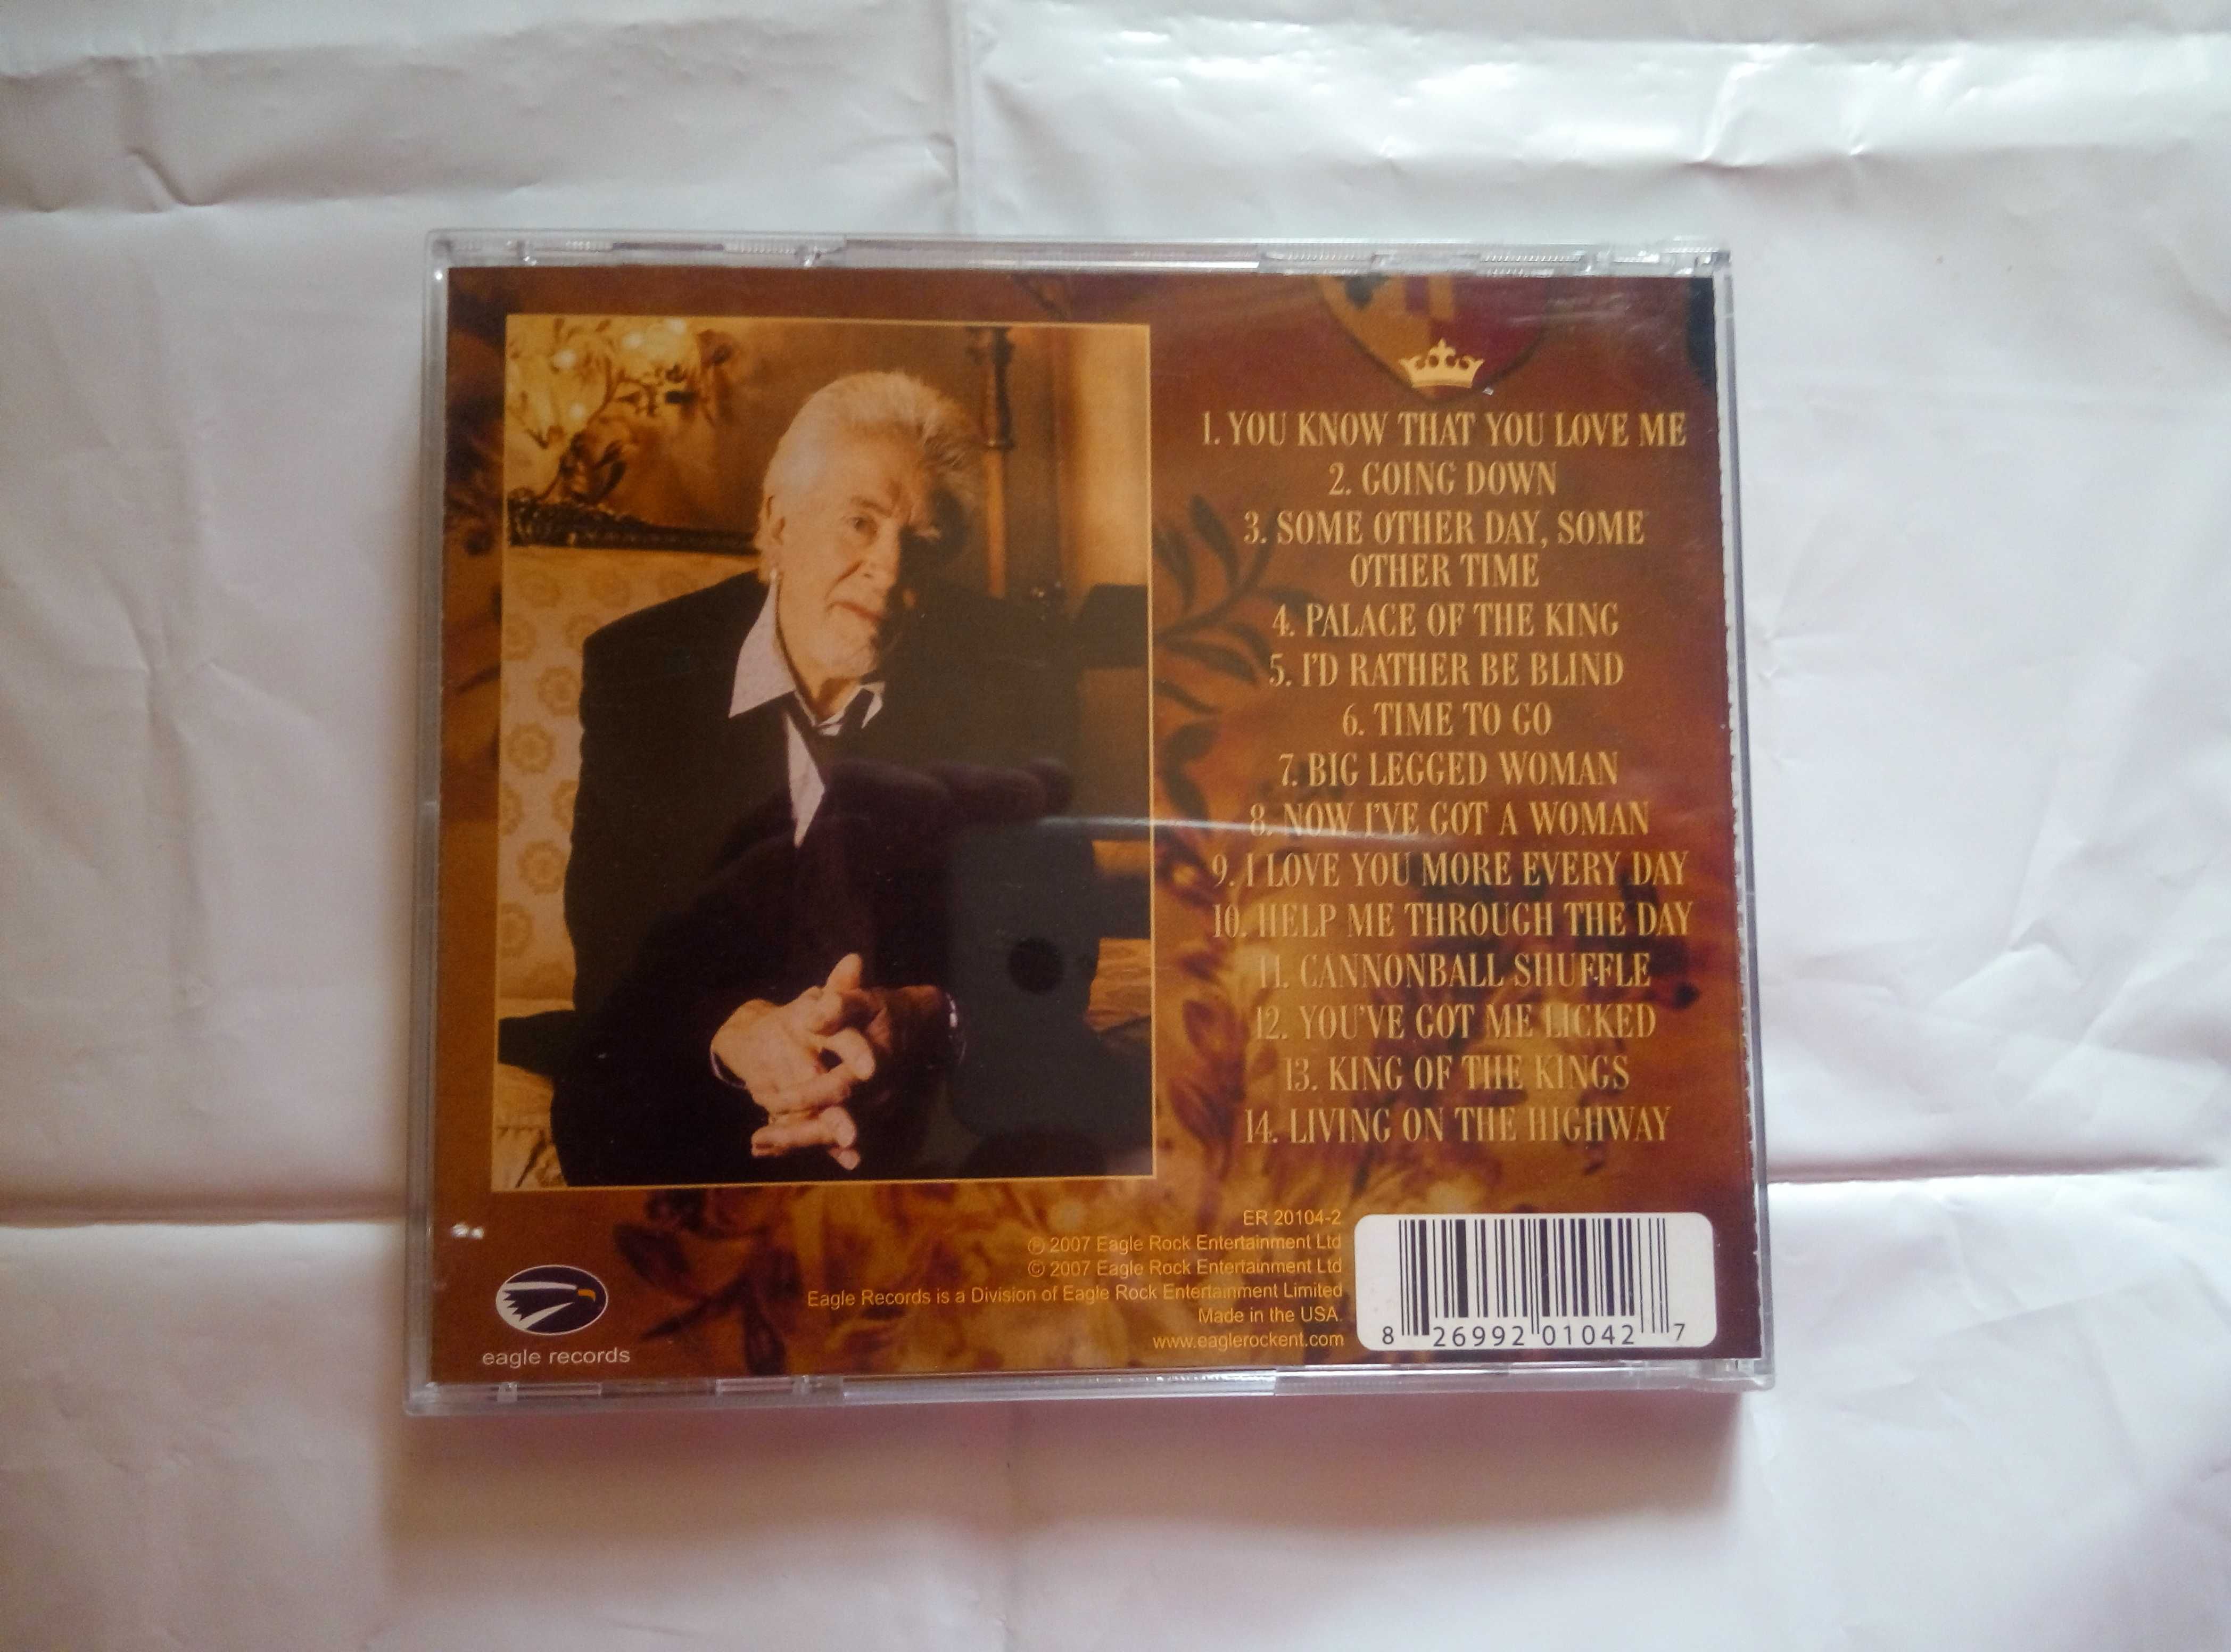 John Mayall and the Bluesbreakers in the palace of the king CD диск